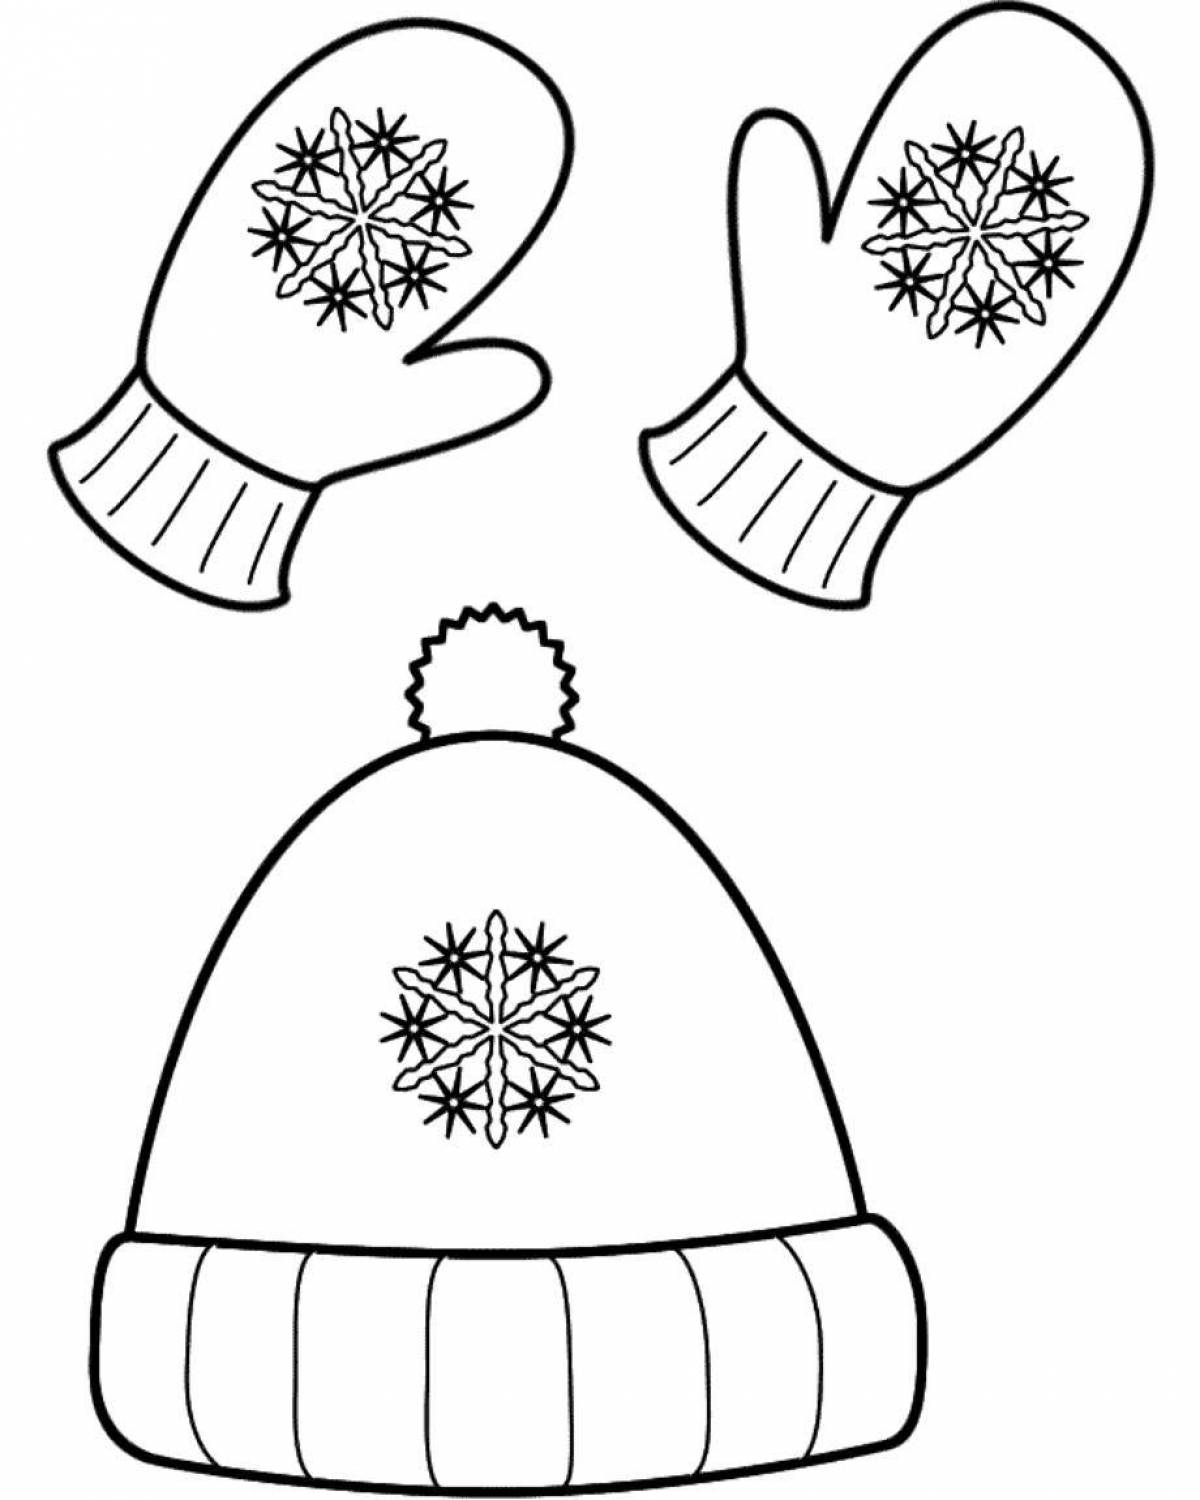 Coloring bright mittens for children 3-4 years old